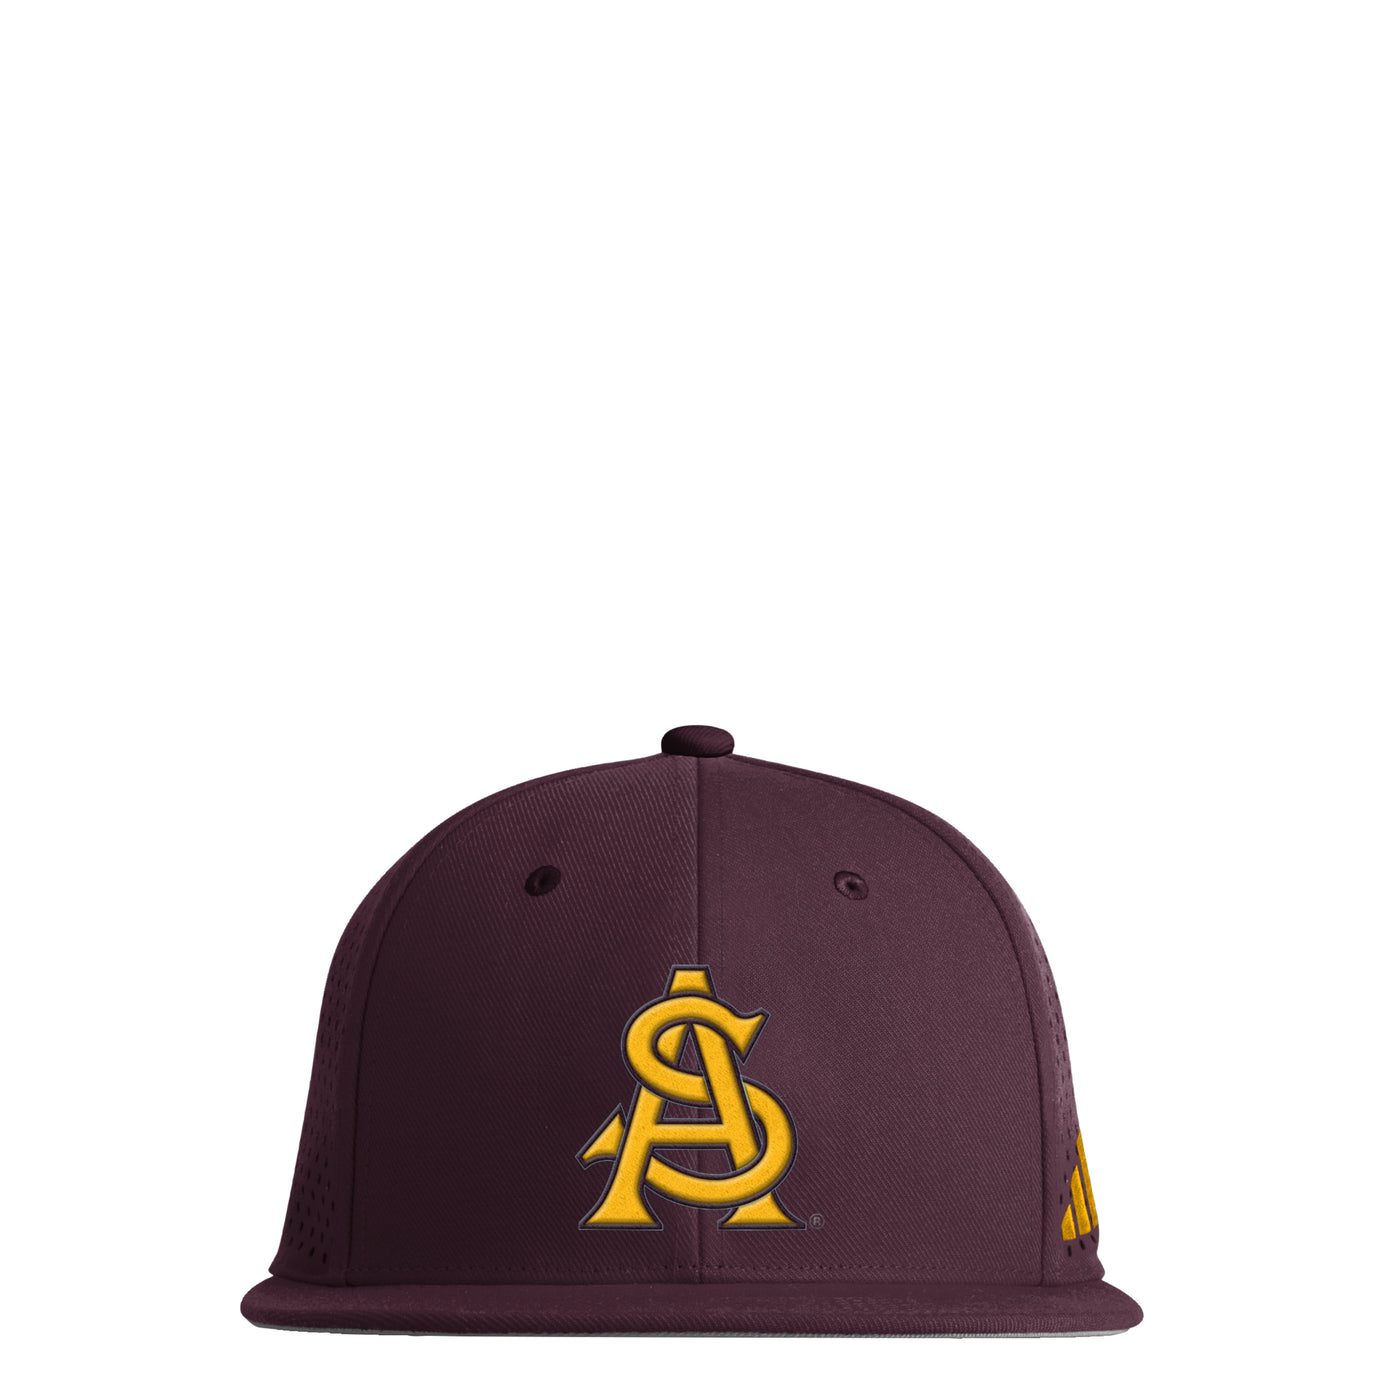 ASU maroon performance style fitted hat with gold interlocking 'A' and 'S' on the front